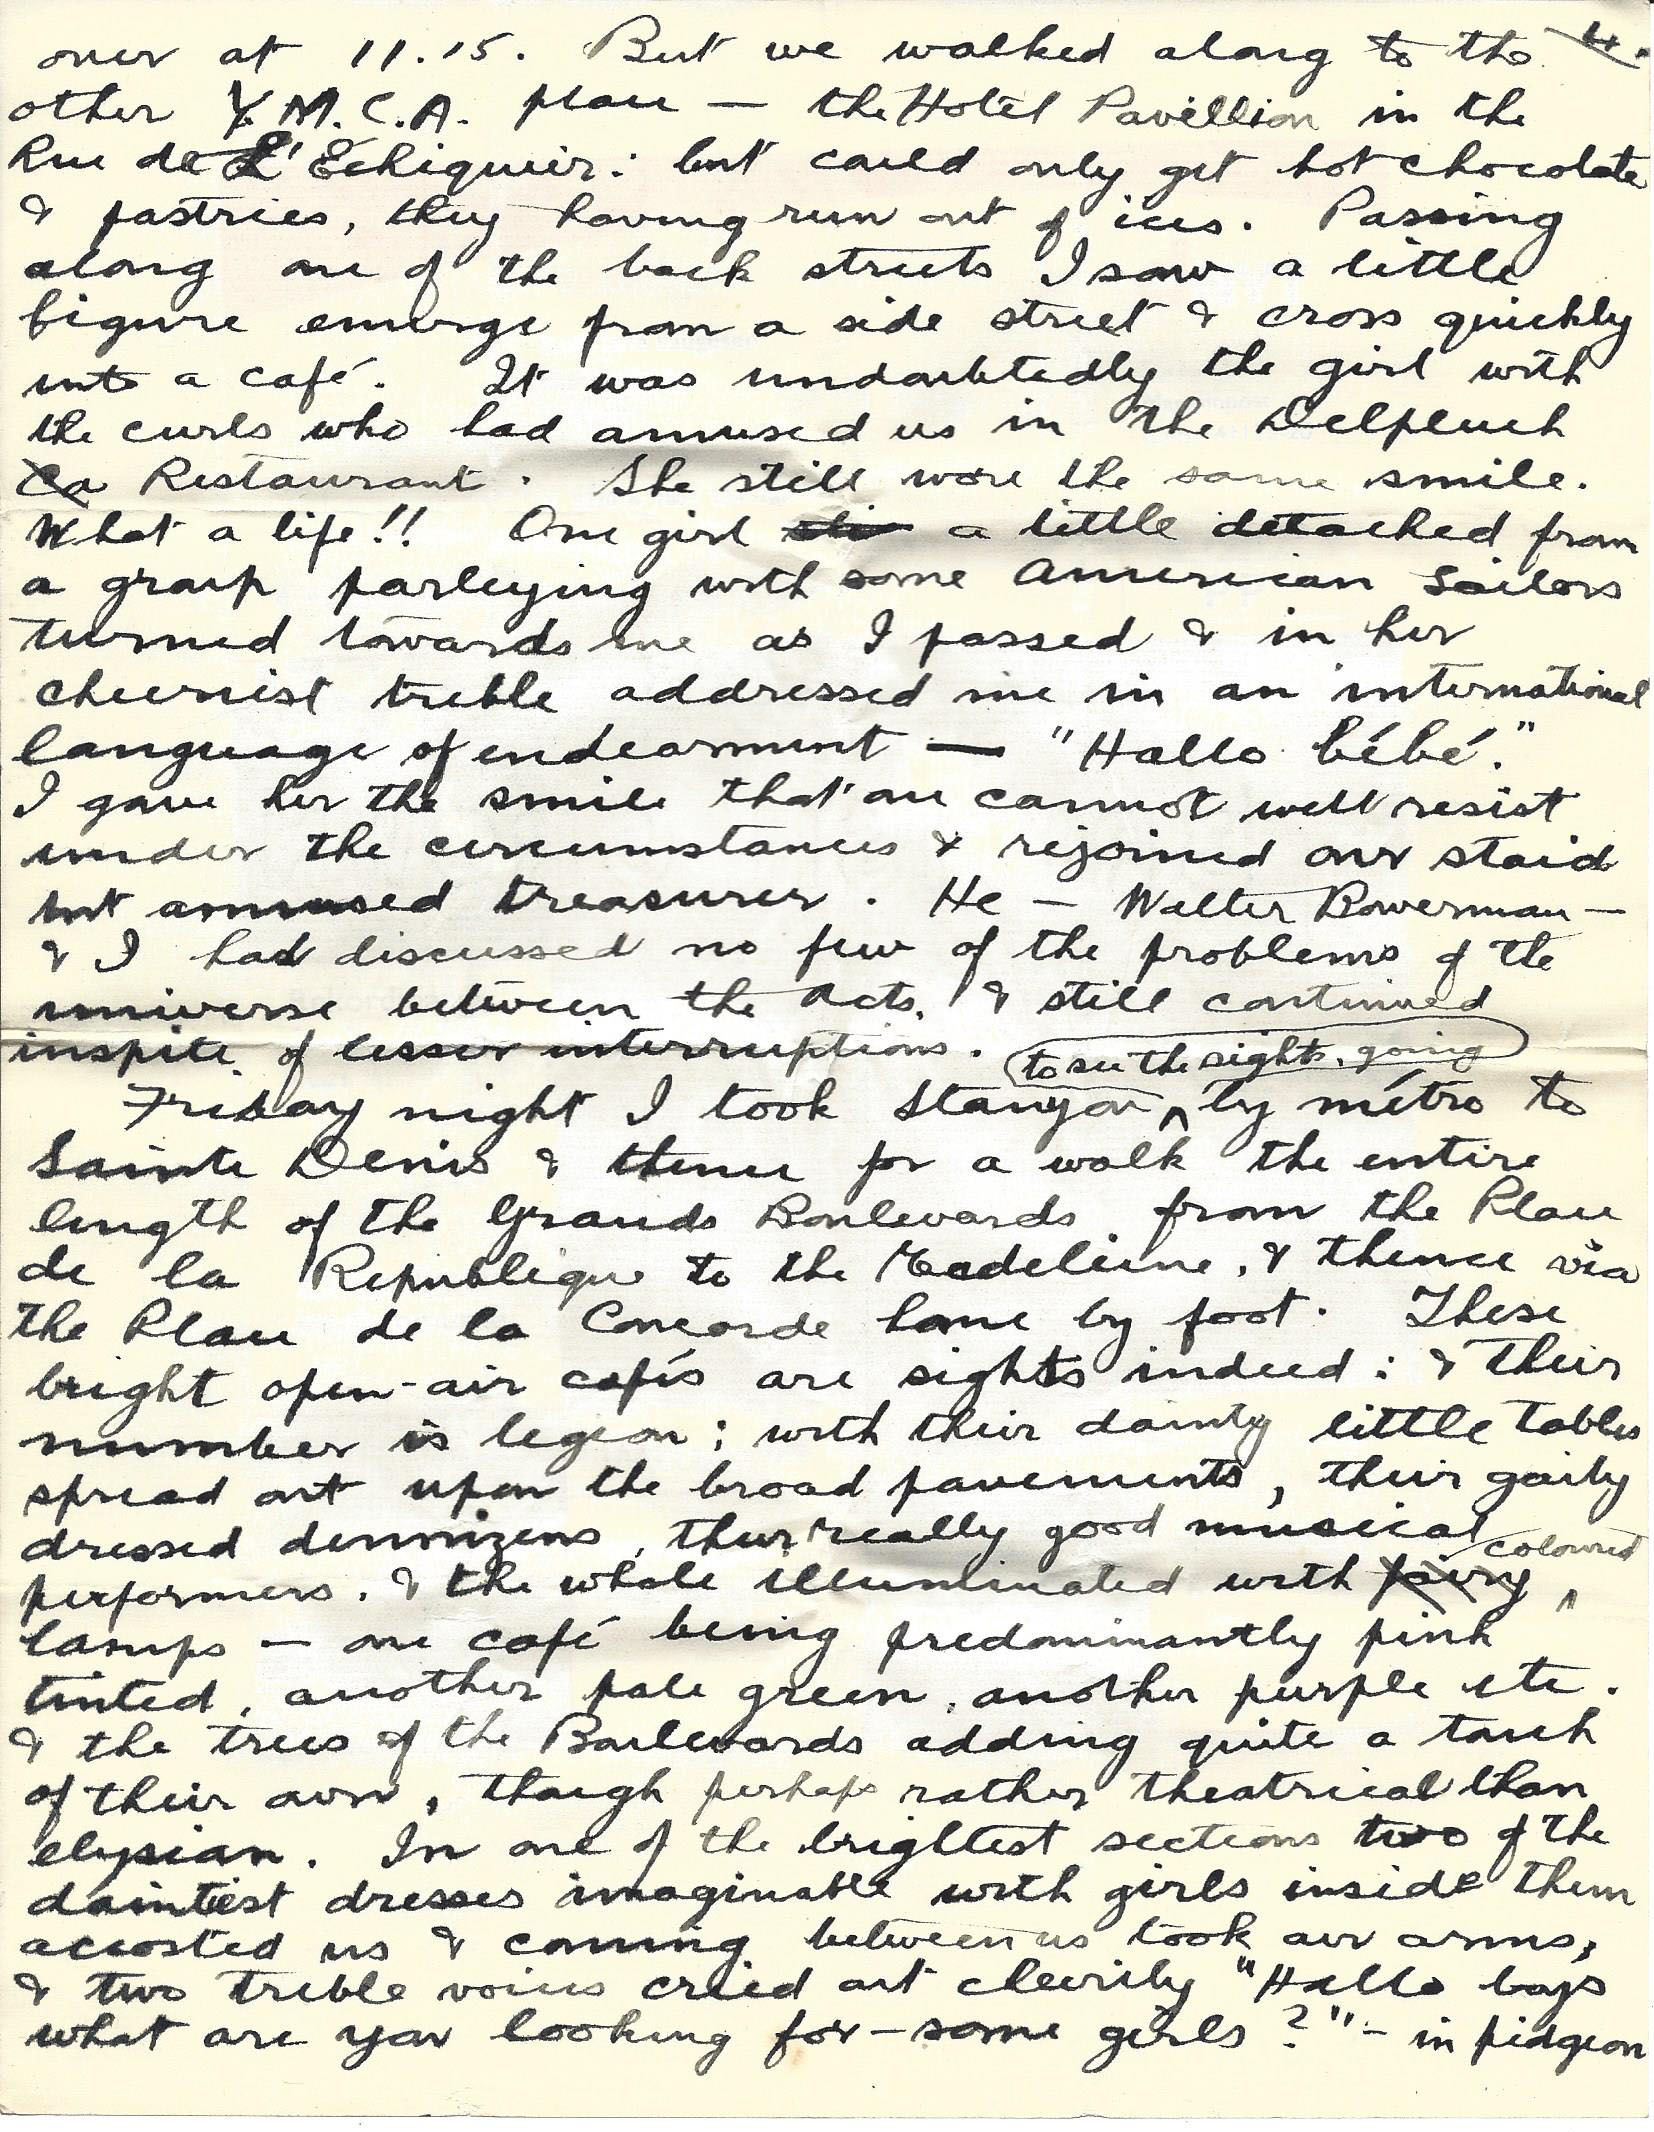 1919-08-16 p4 Donald Bearman letter to his father